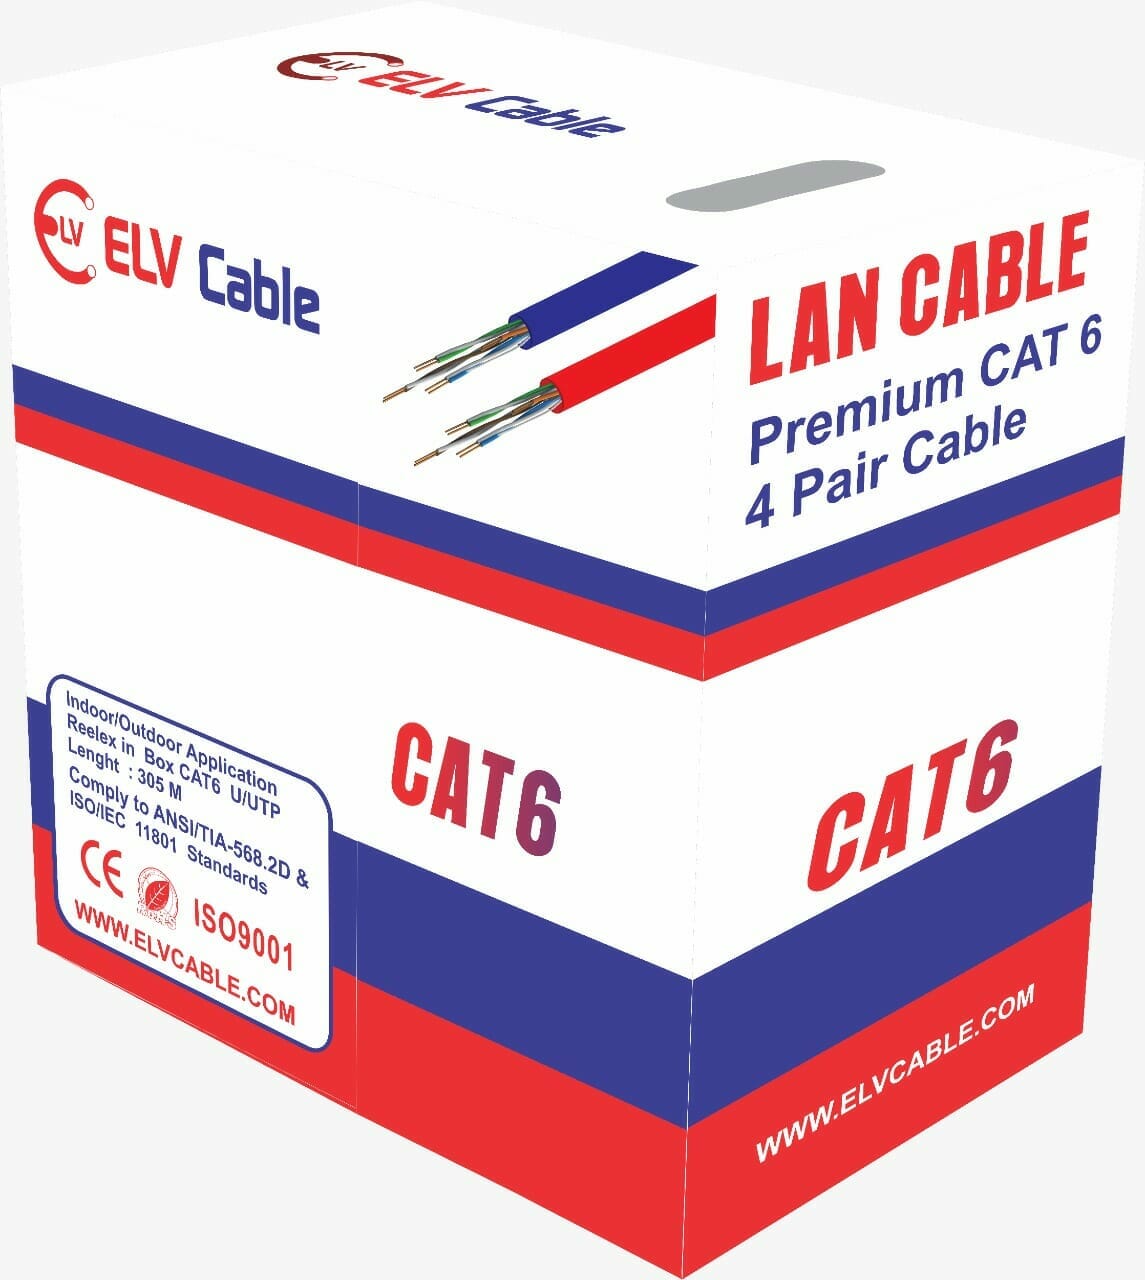 elv cable network cable lan cable cat6 cat6a cat7 indoor outdoor cable du etisalat approved cable